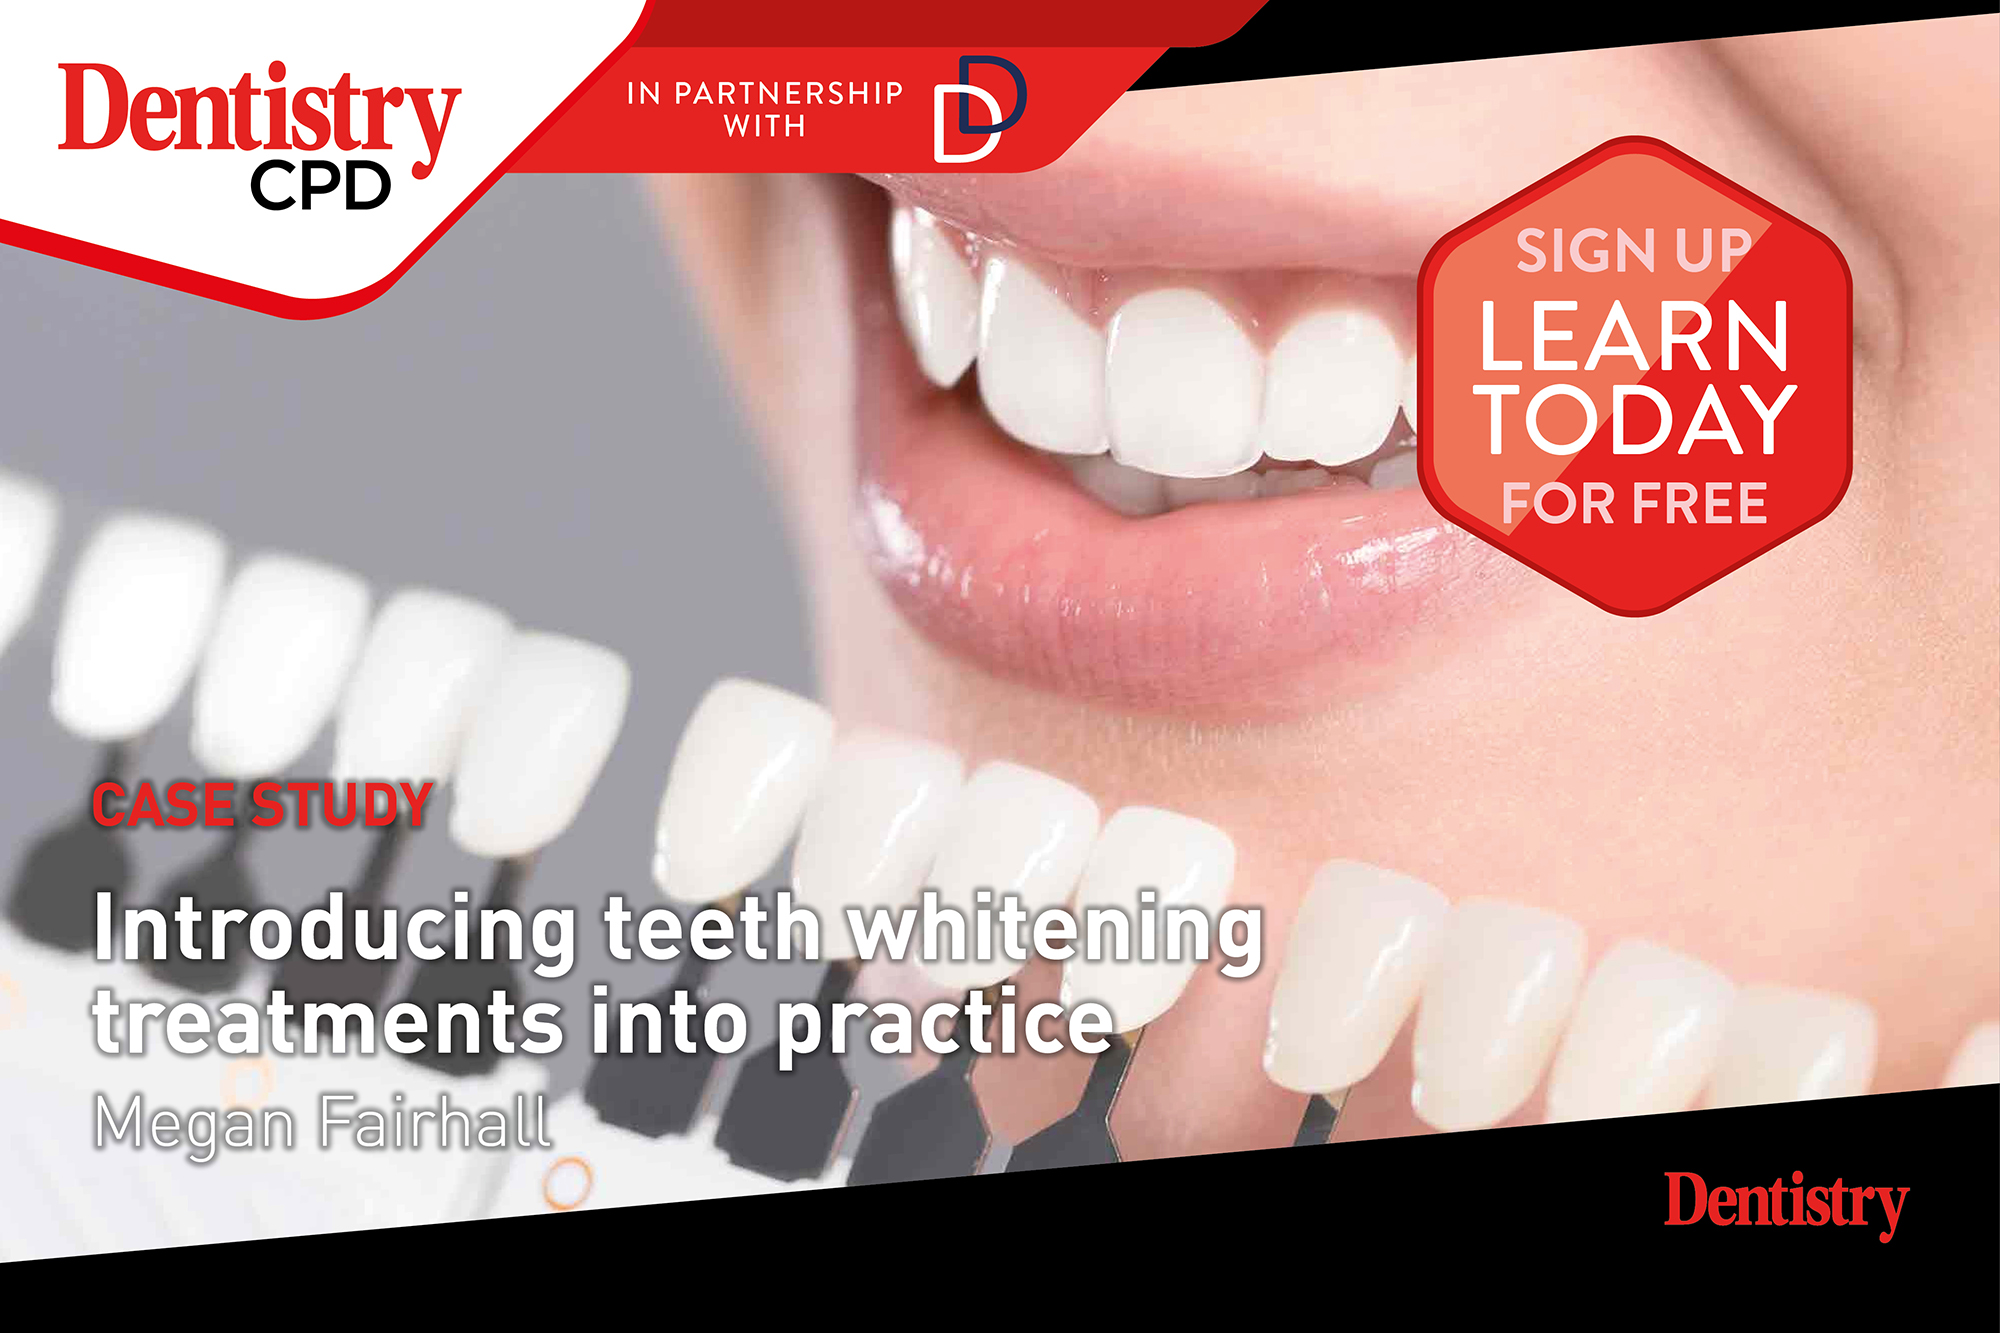 Dentistry CPD: new this week – introducing teeth whitening treatments into practice